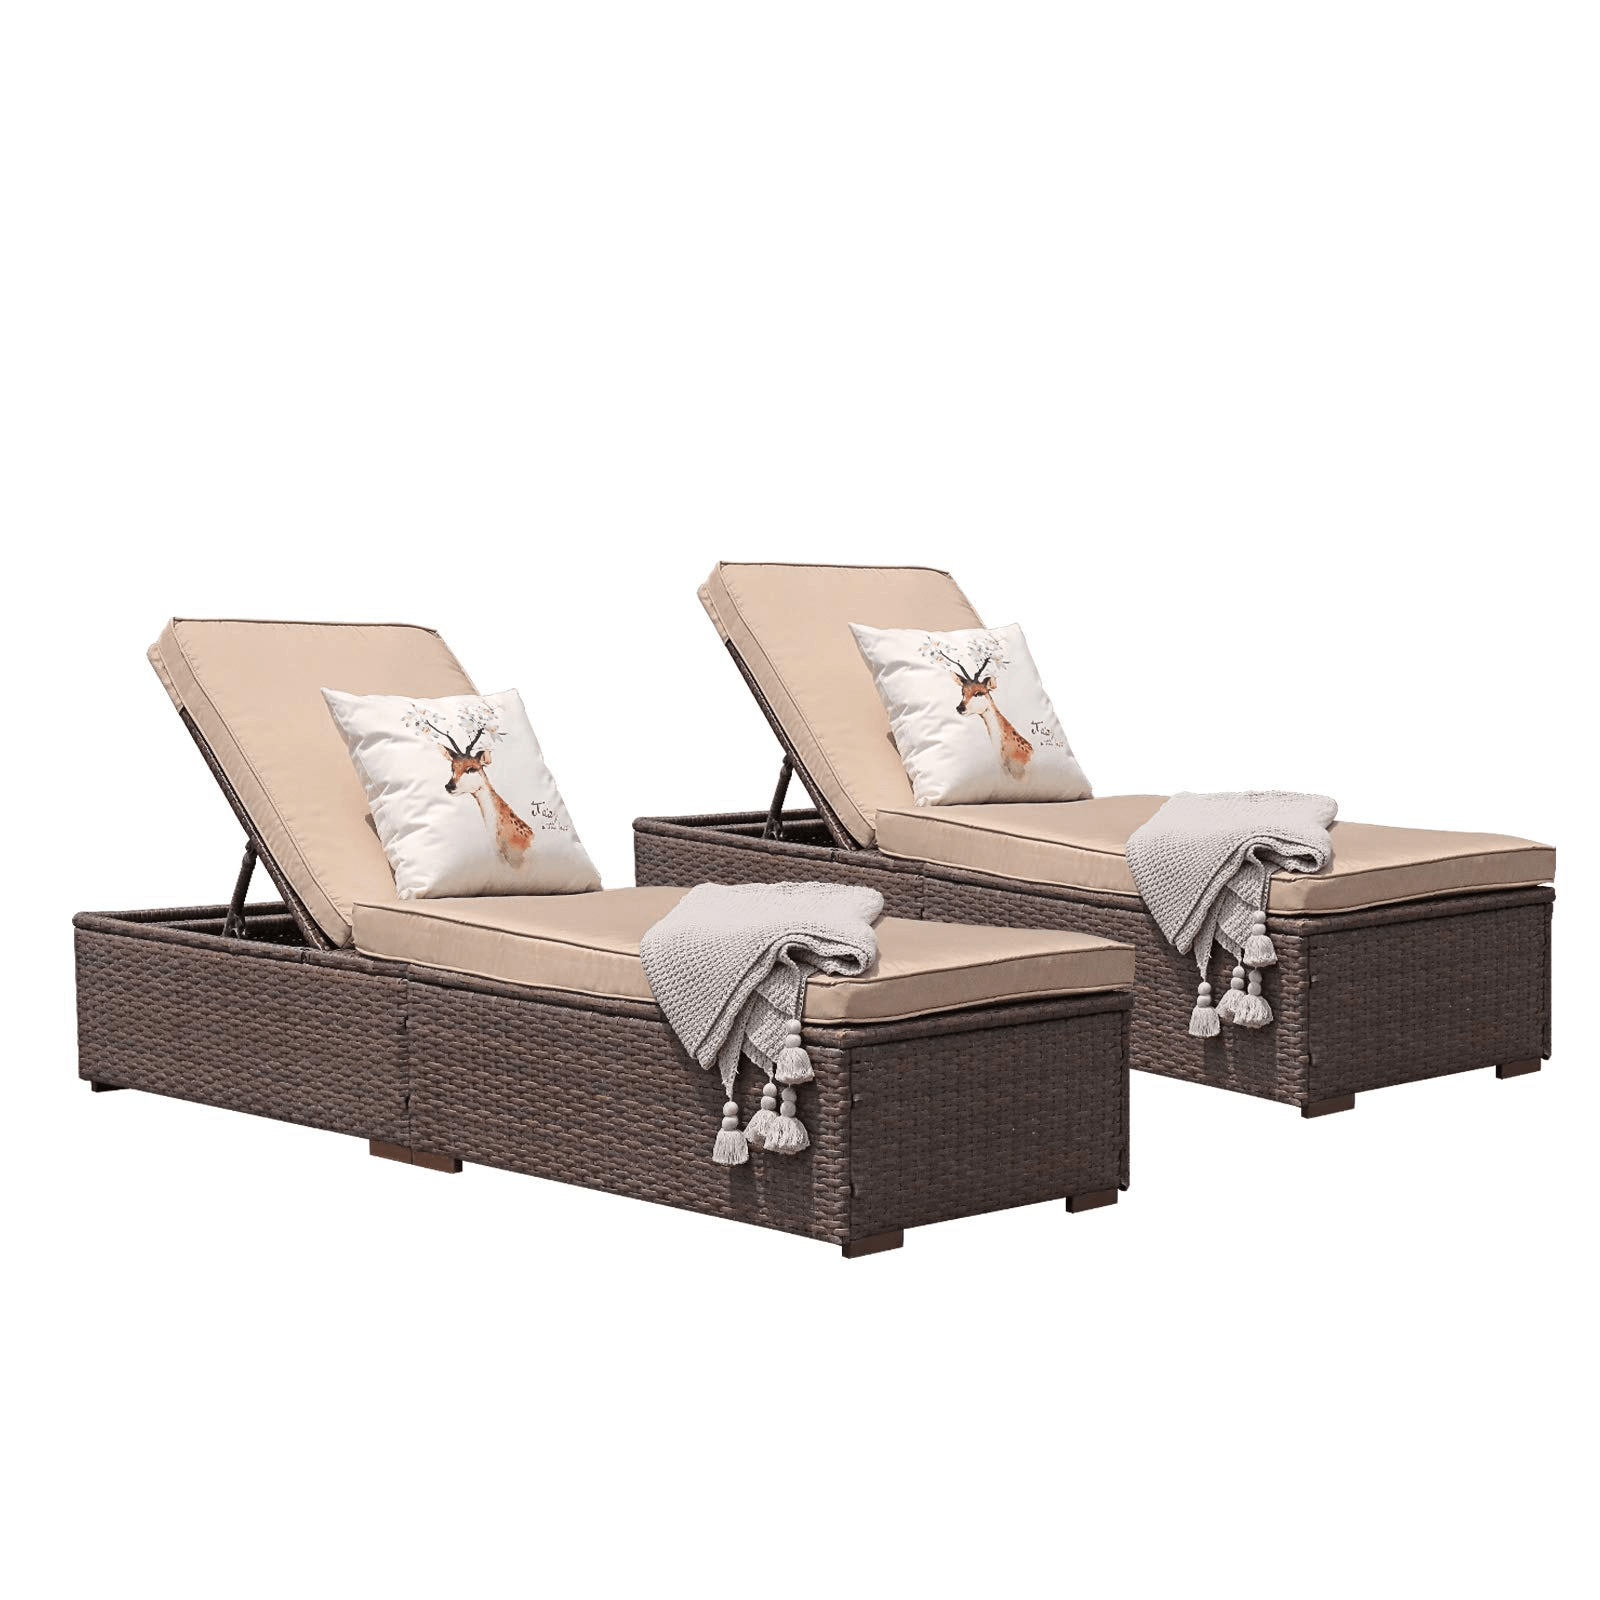 2pcs Patio Lounge Chairs Wicker Outdoor Loungers with Beige Cushions, Rectangle Shape | Orange-Casual